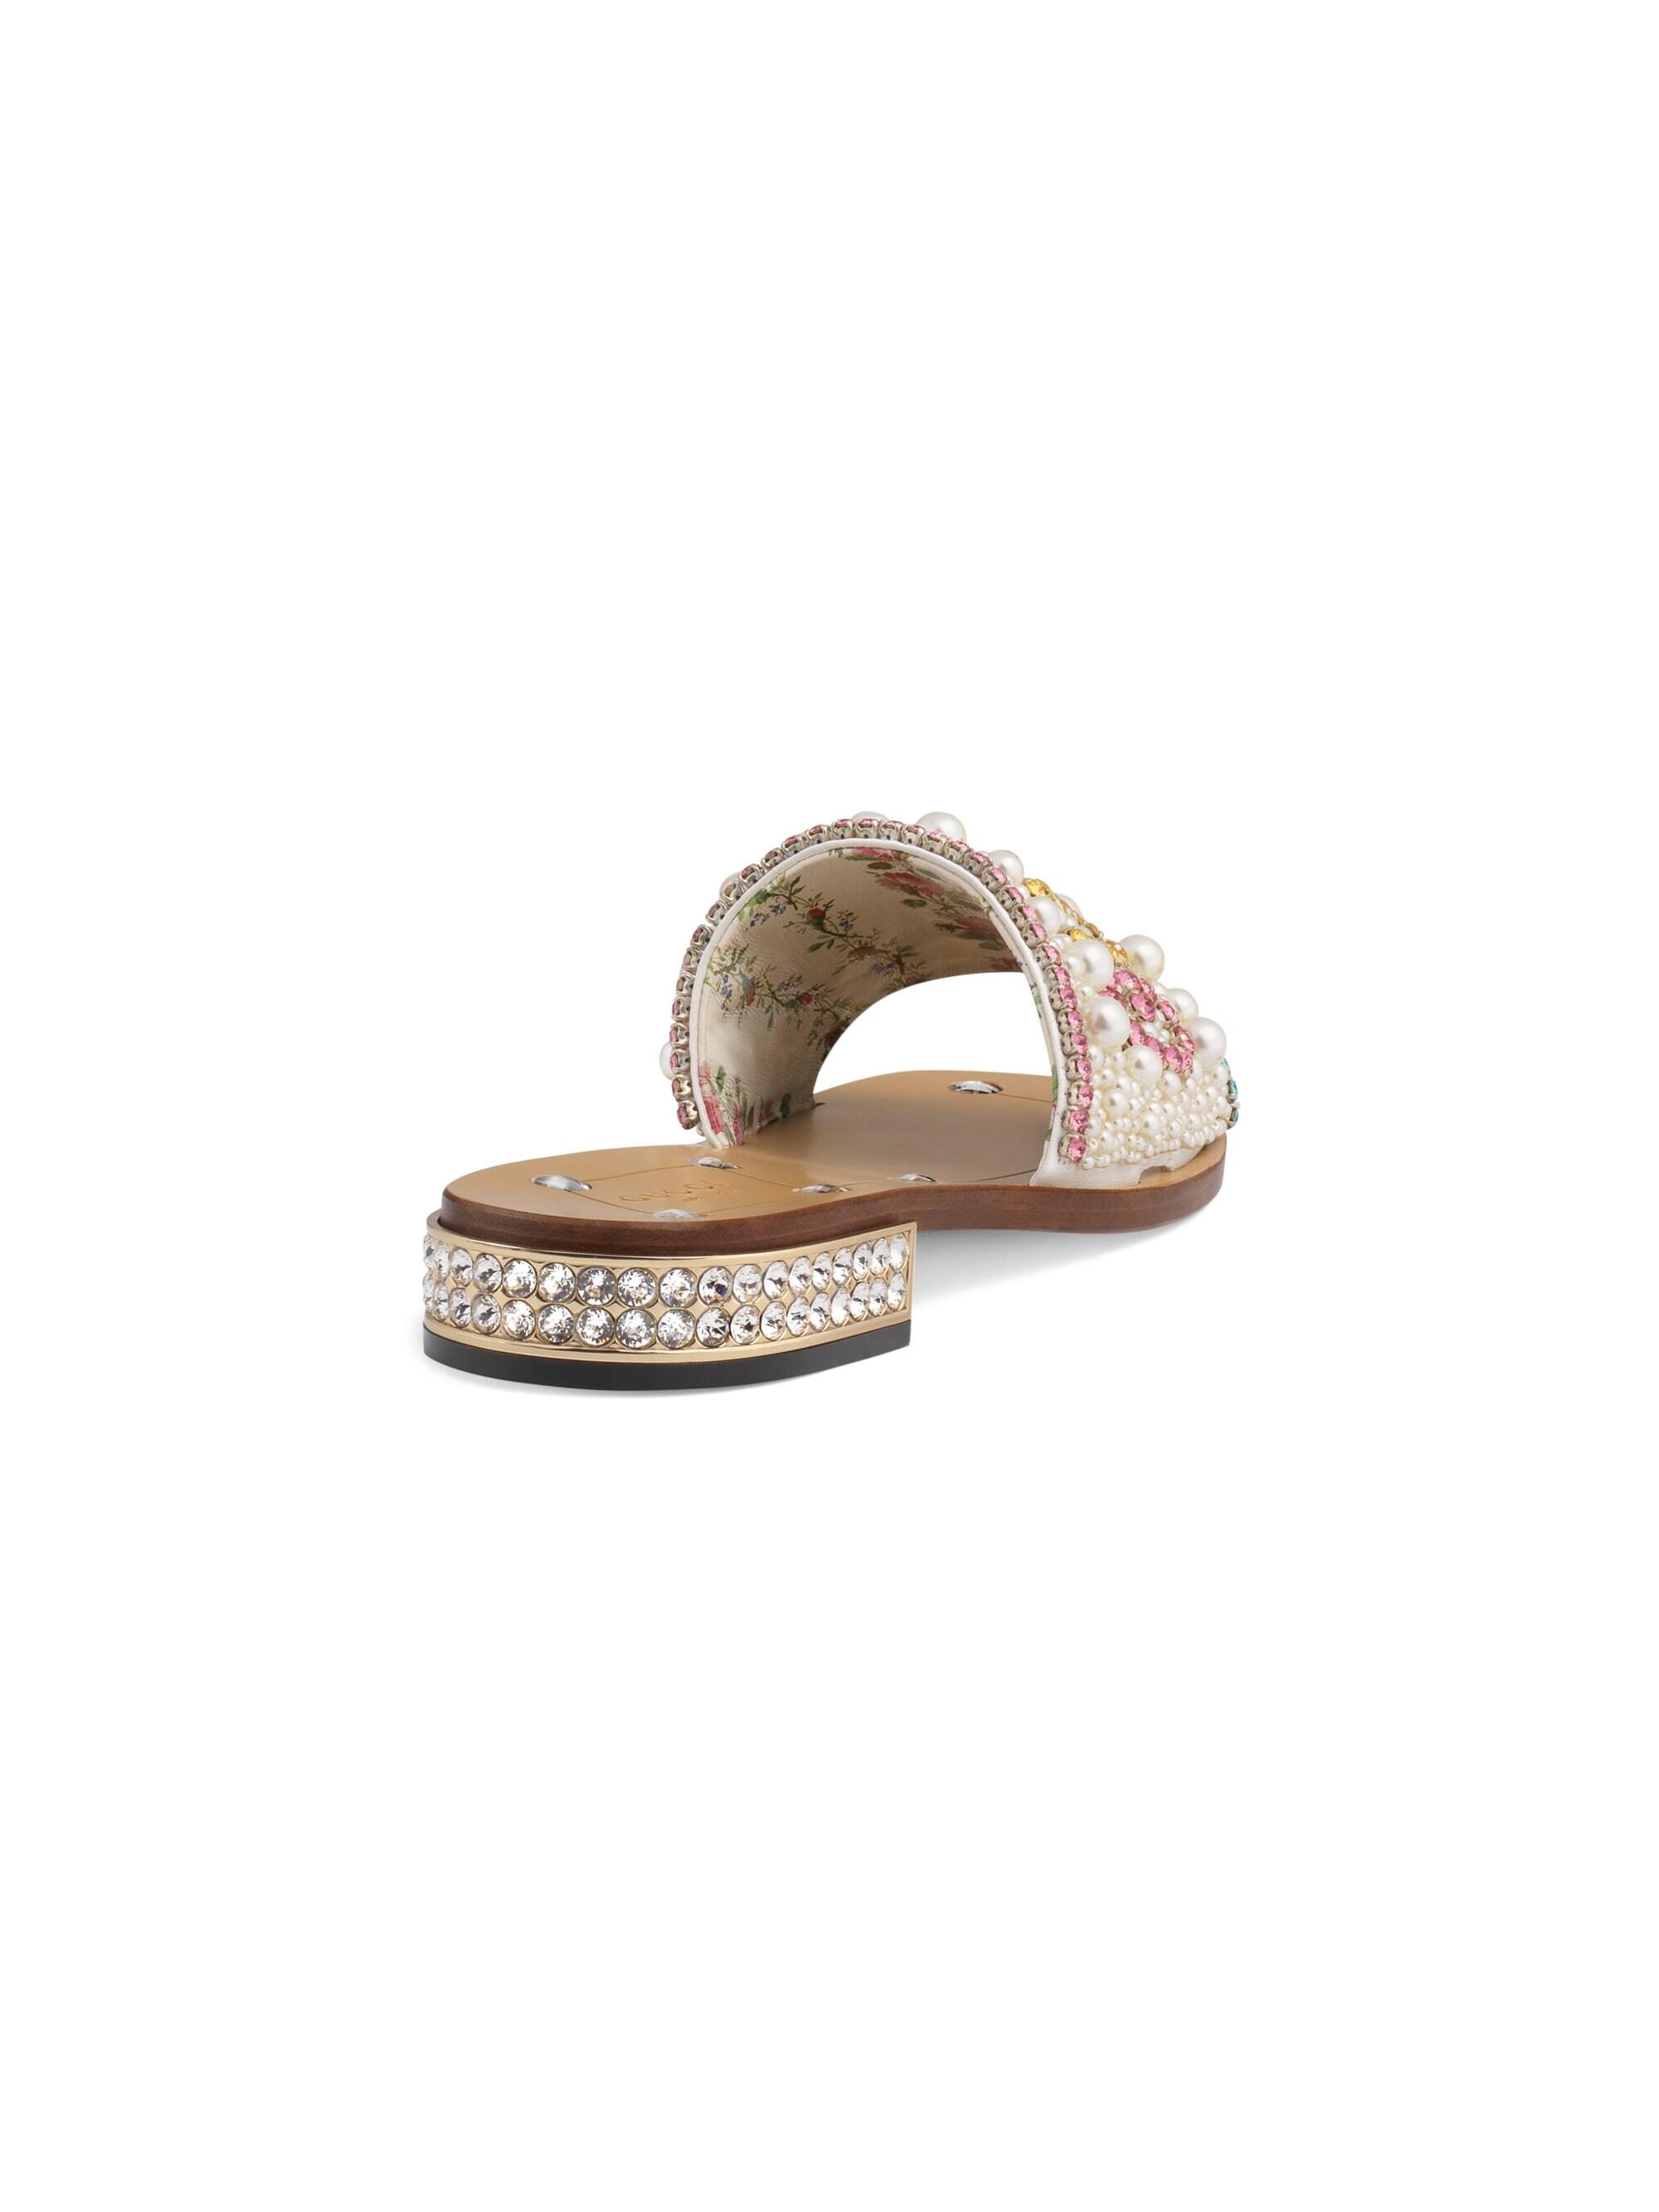 Gucci Women's Crystal & Pearl Leather Mules | Lyst